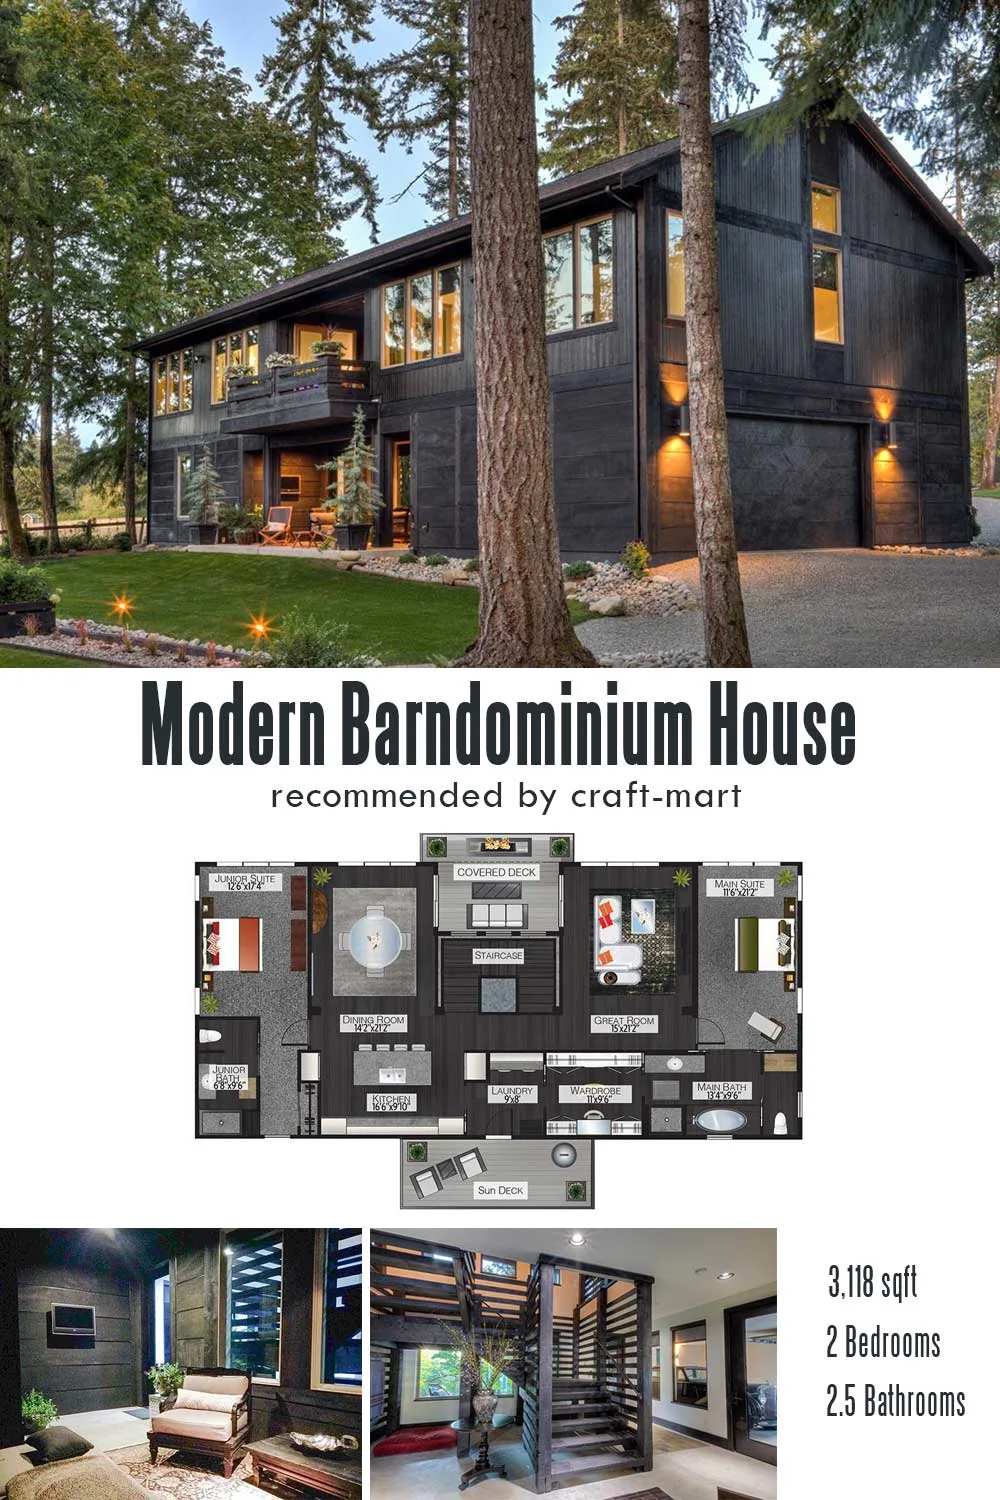 Modern Barndominium House with Two Bedroom Suites